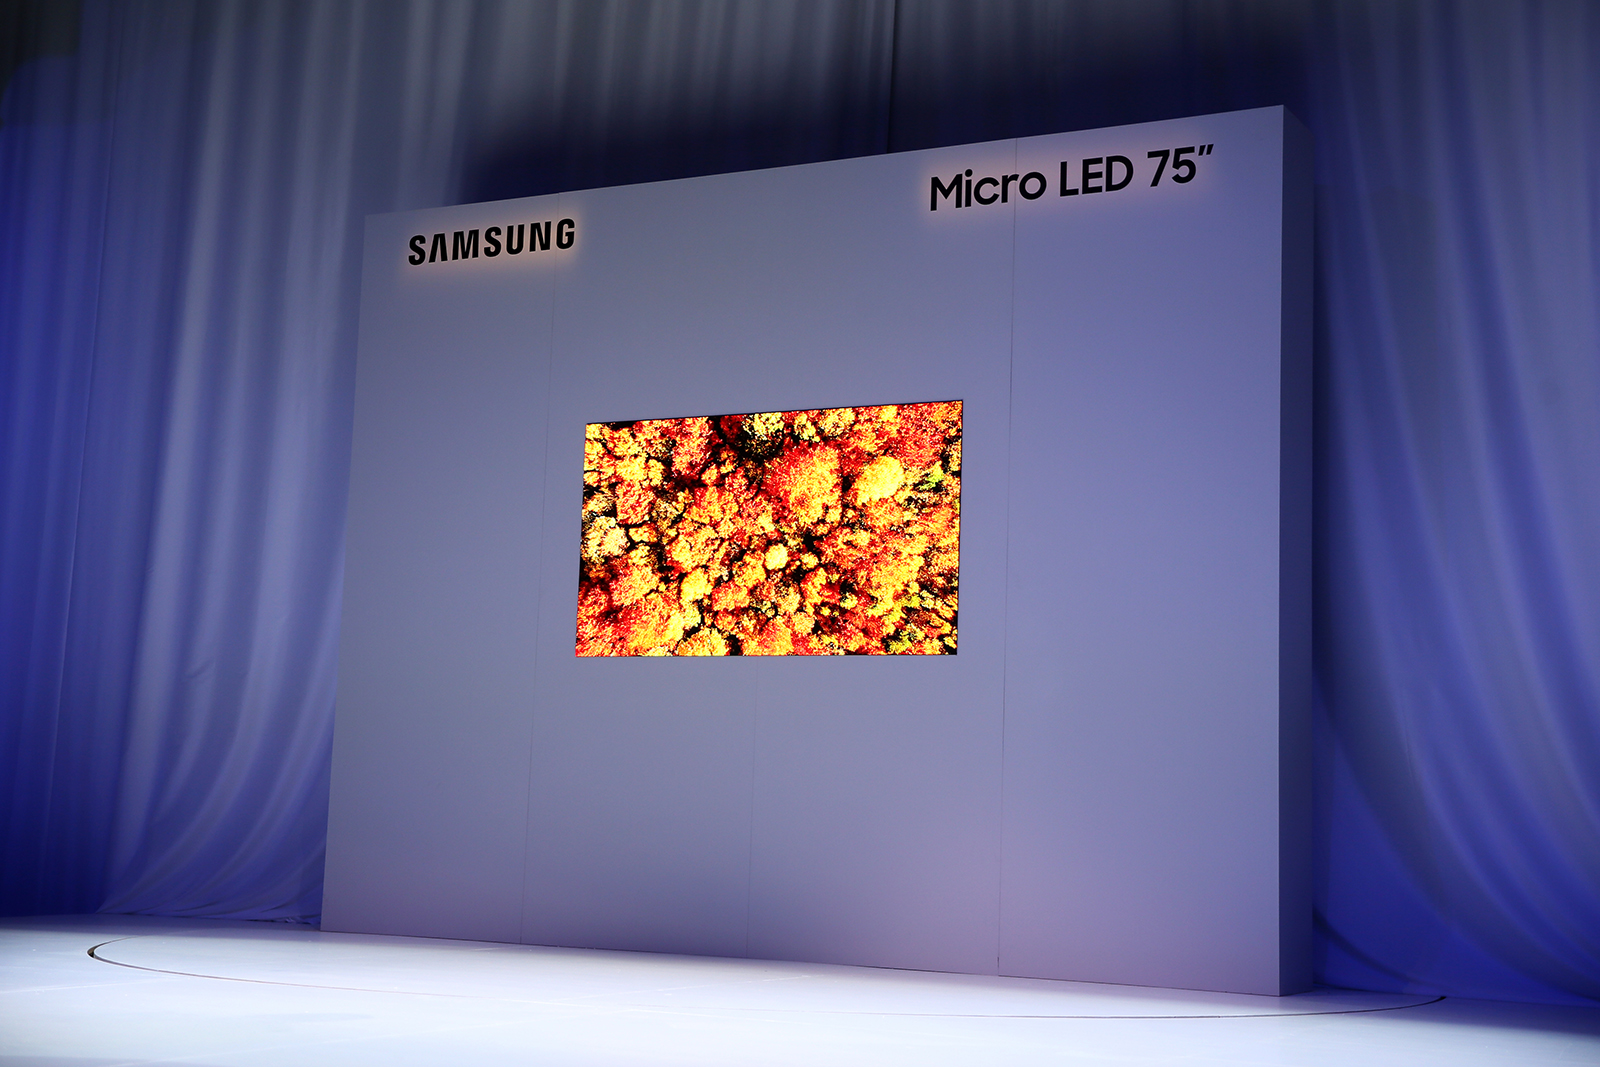 Samsung 75-inch, 4K MicroLED display on stage at CES 2019